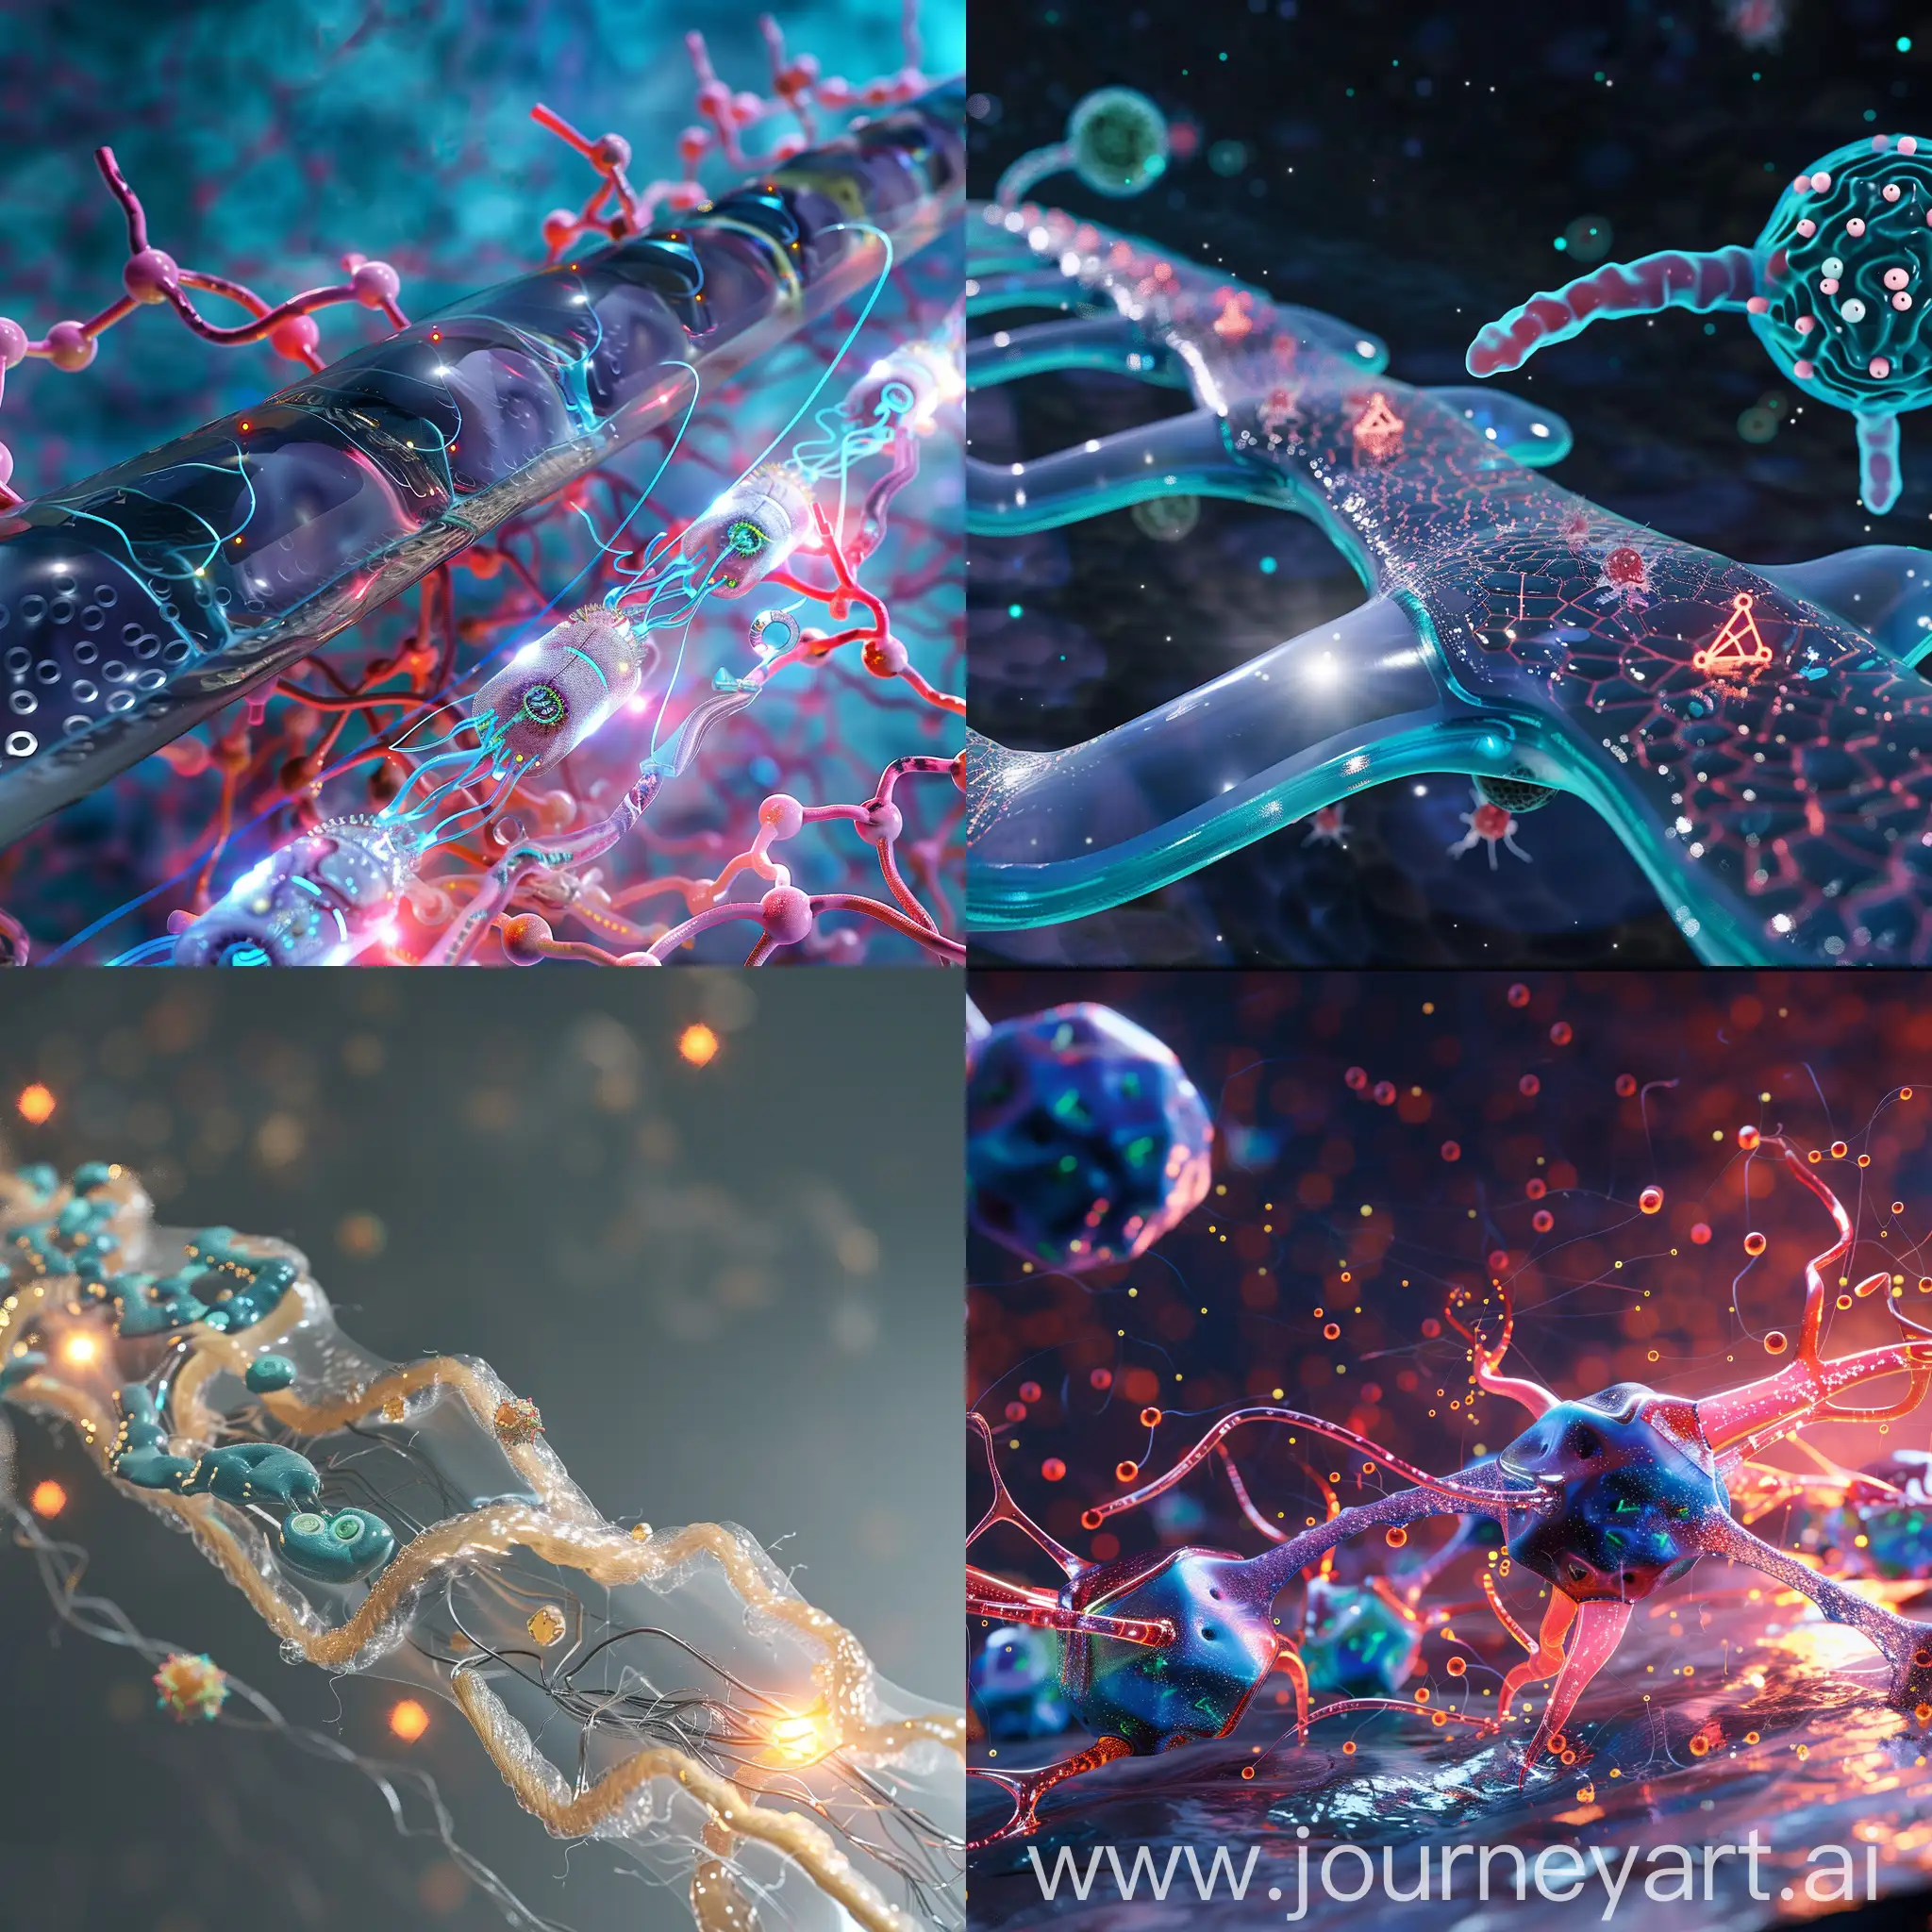 Concept art relating ion channels and microfluidics and neural networks